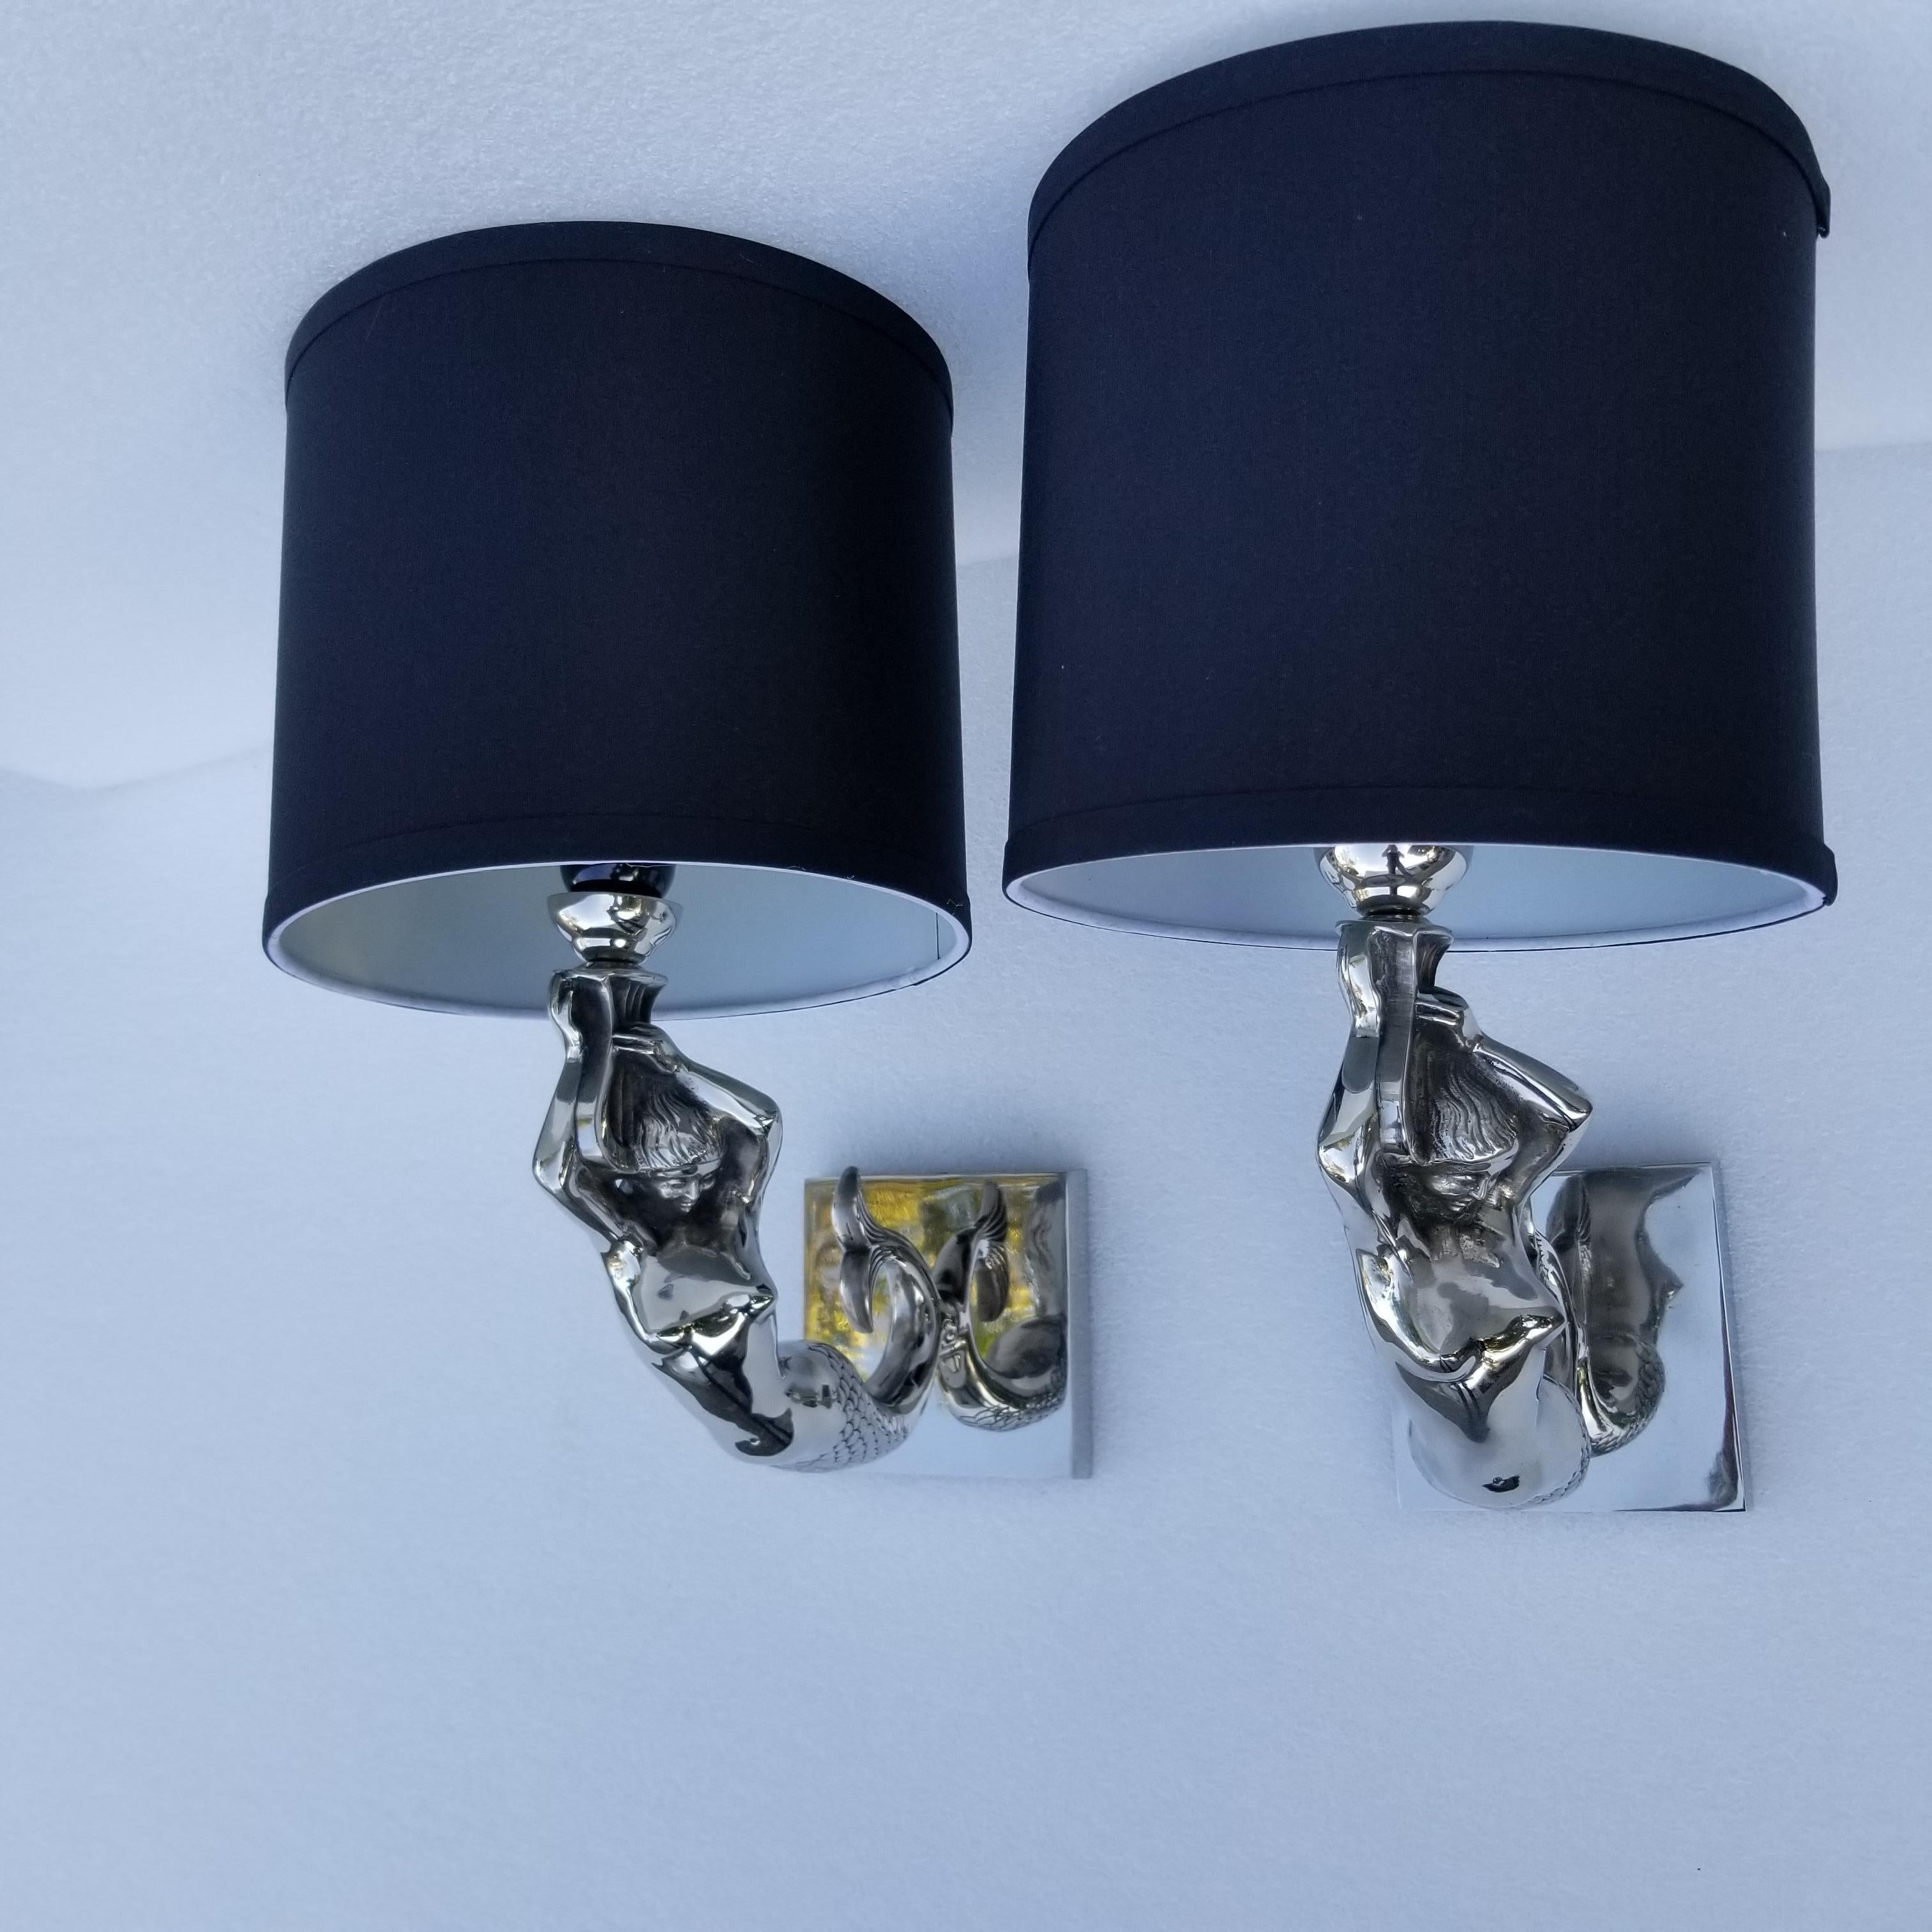 Pair of Impressive Nickel-Plated Bronze Mermaid Sconces In Good Condition For Sale In Miami, FL